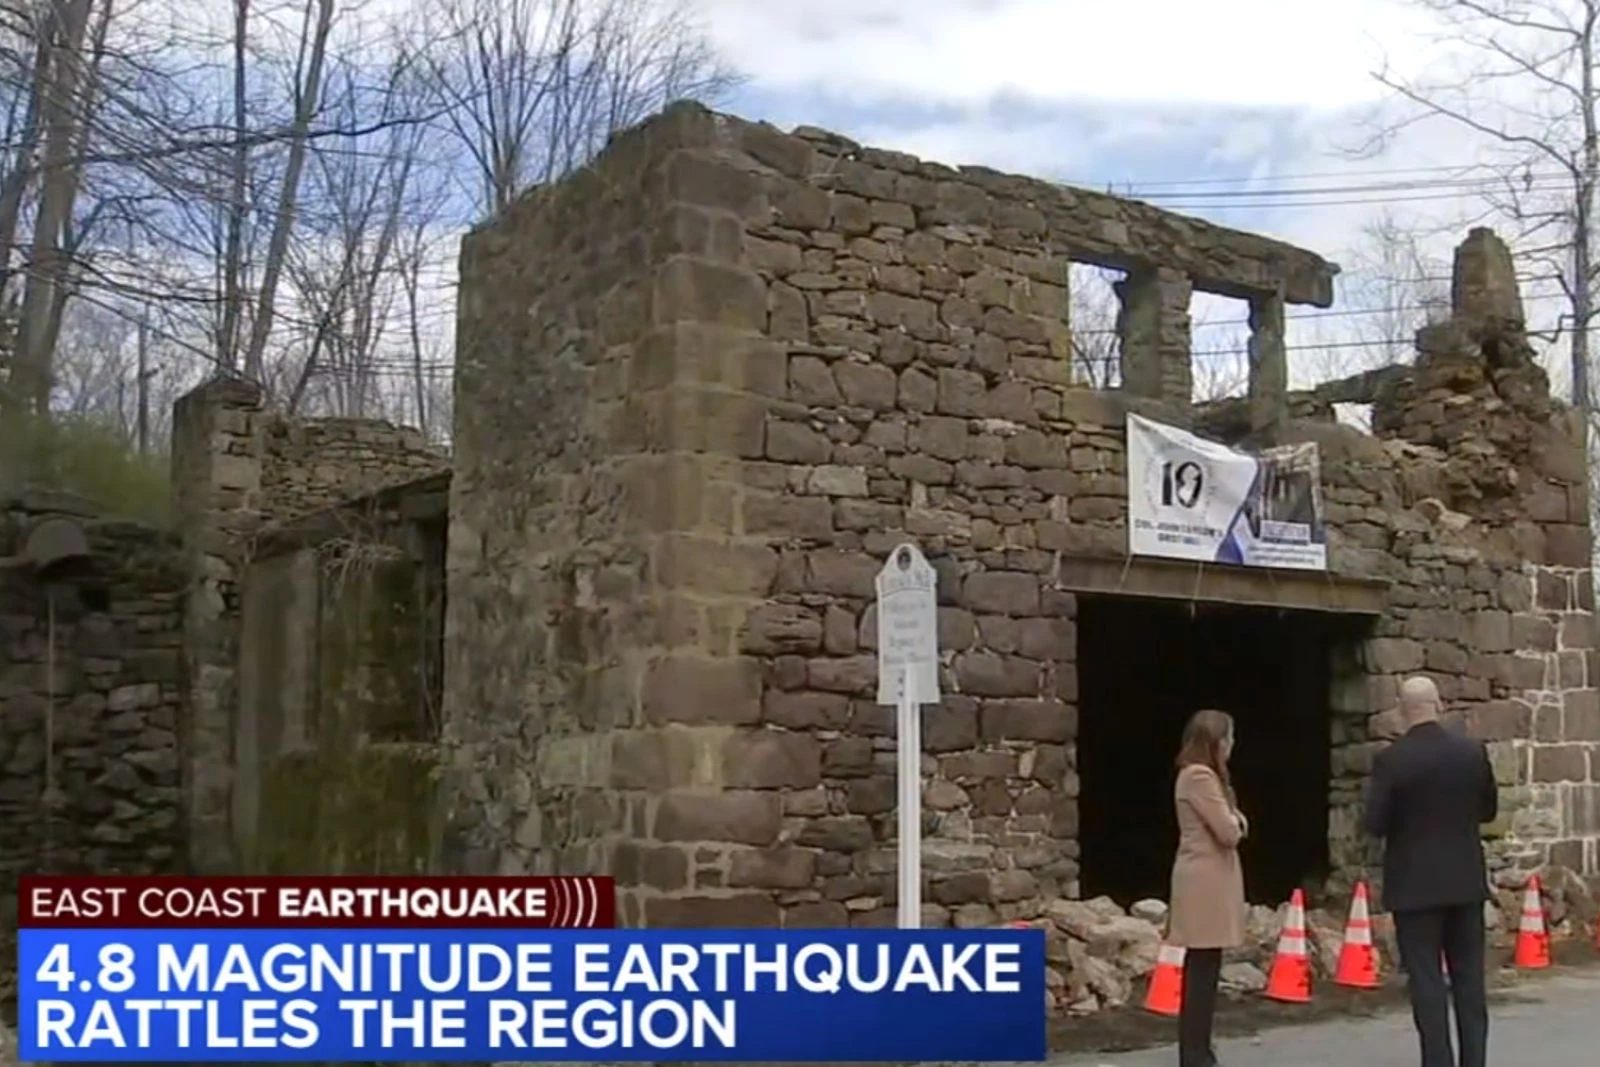 Earthquake damage to a historic mill in Readington. (6ABC Action News)